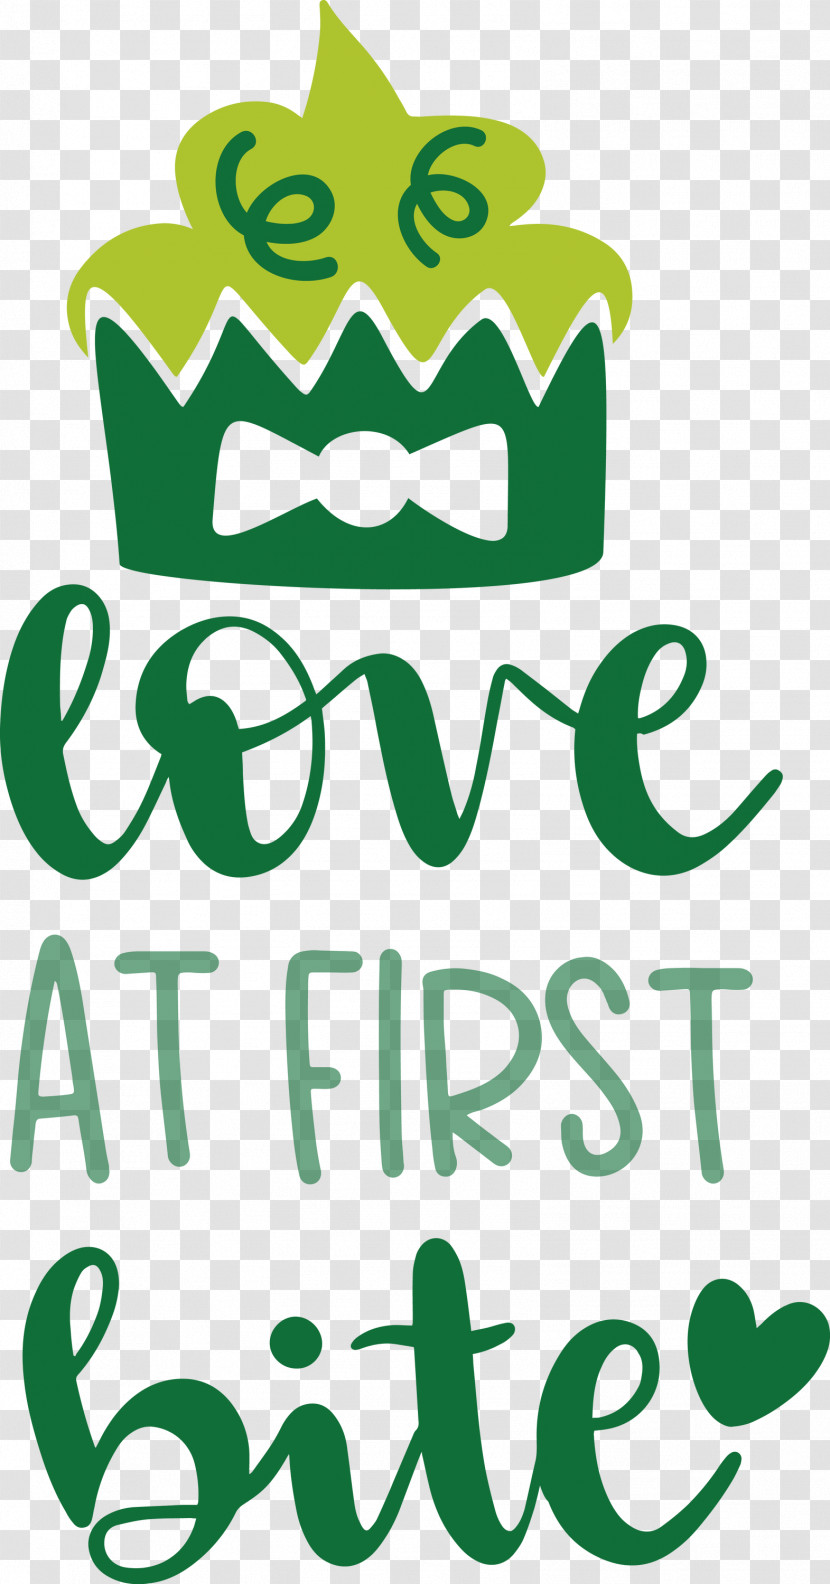 Love At First Bite Cooking Kitchen Transparent PNG